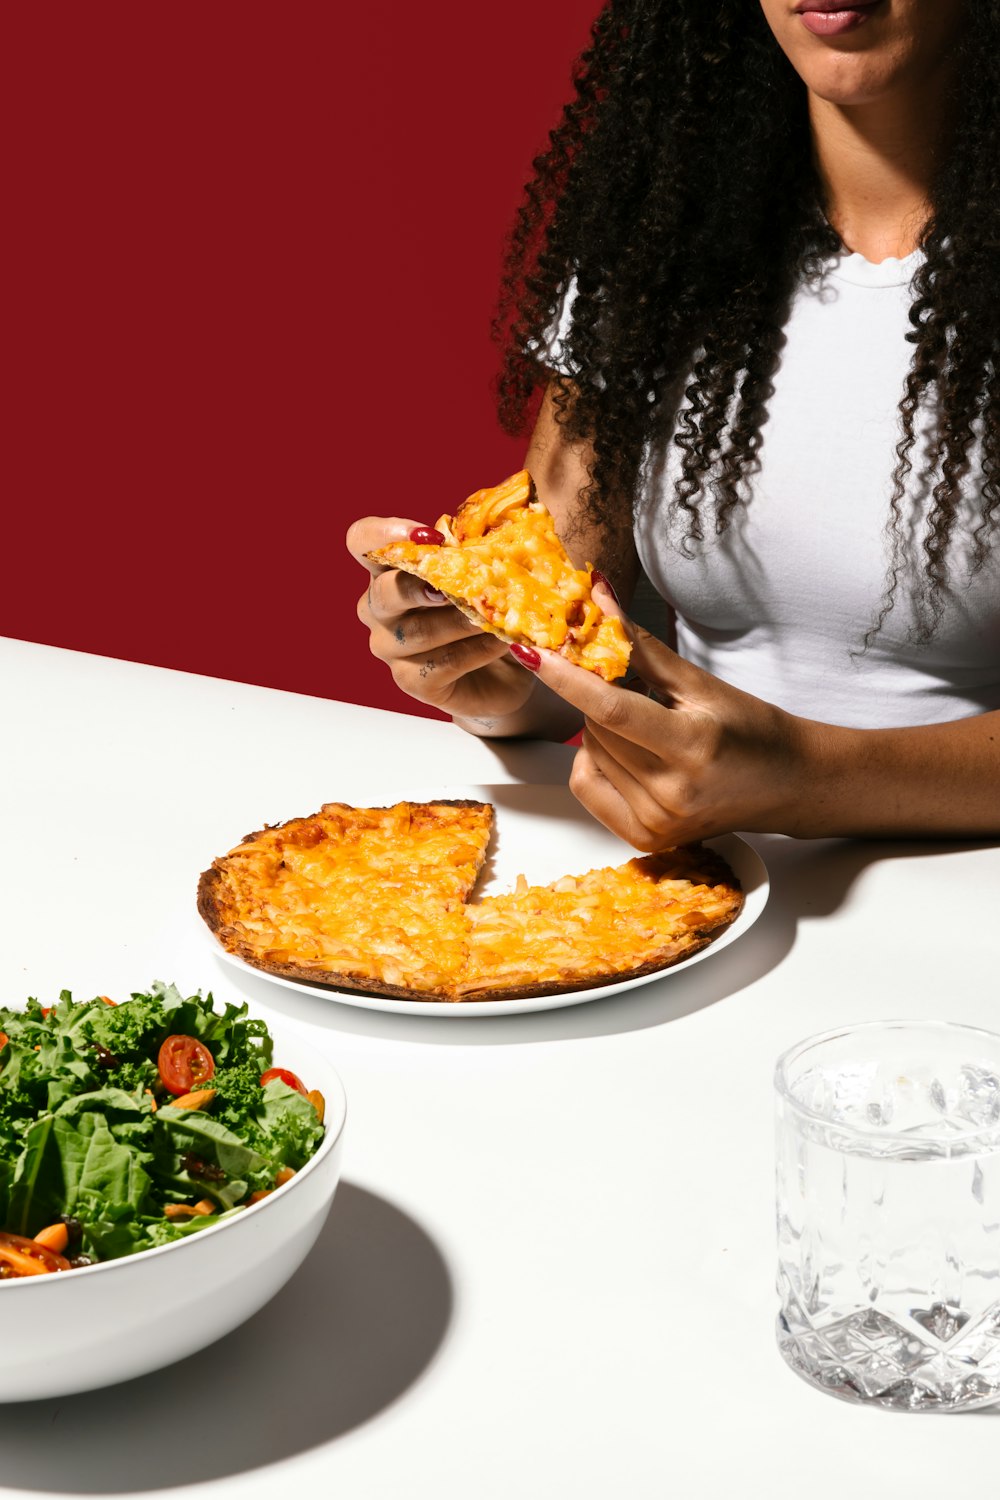 a woman sitting at a table eating a piece of pizza